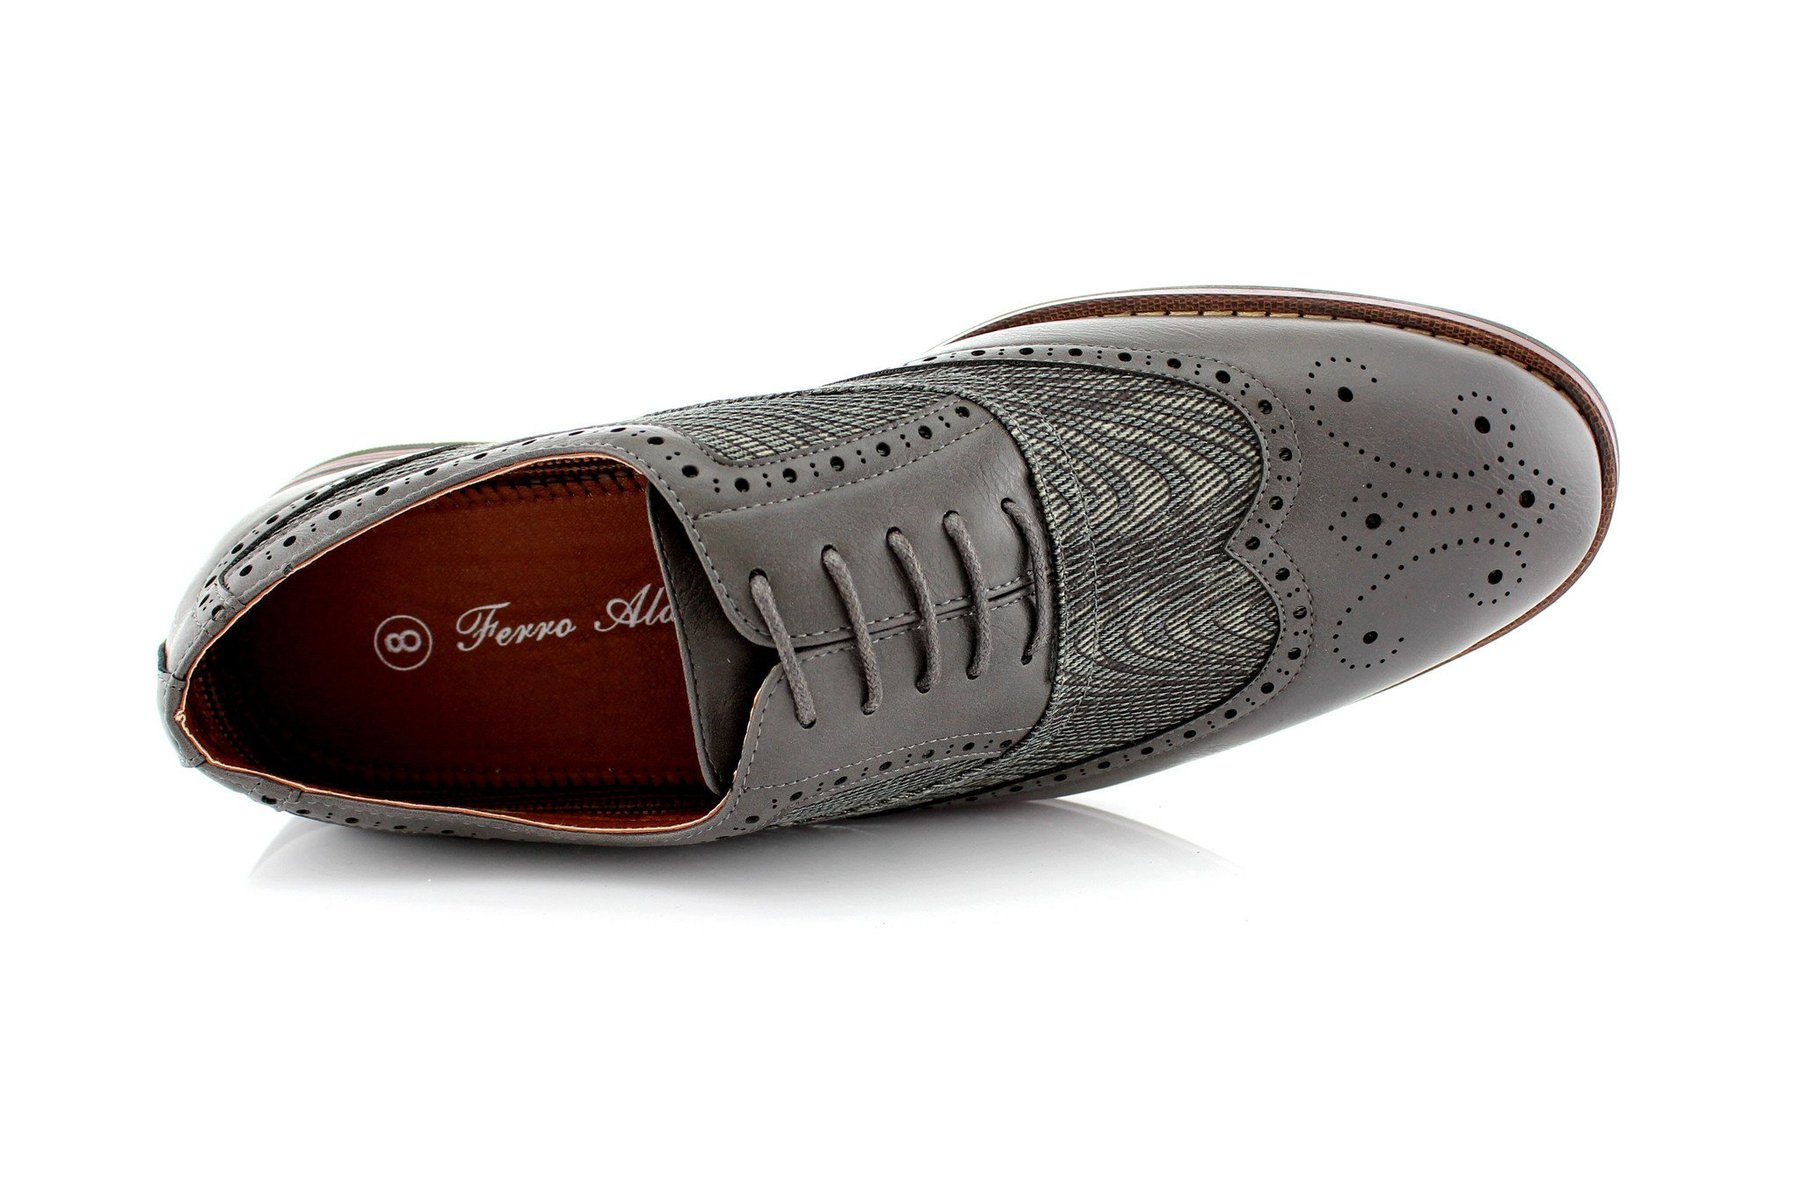 Ferro Aldo Alan M139001G Mens Classic Perforated Duo-Texture Lace-up Wingtip Oxford Dress Shoes - image 3 of 3